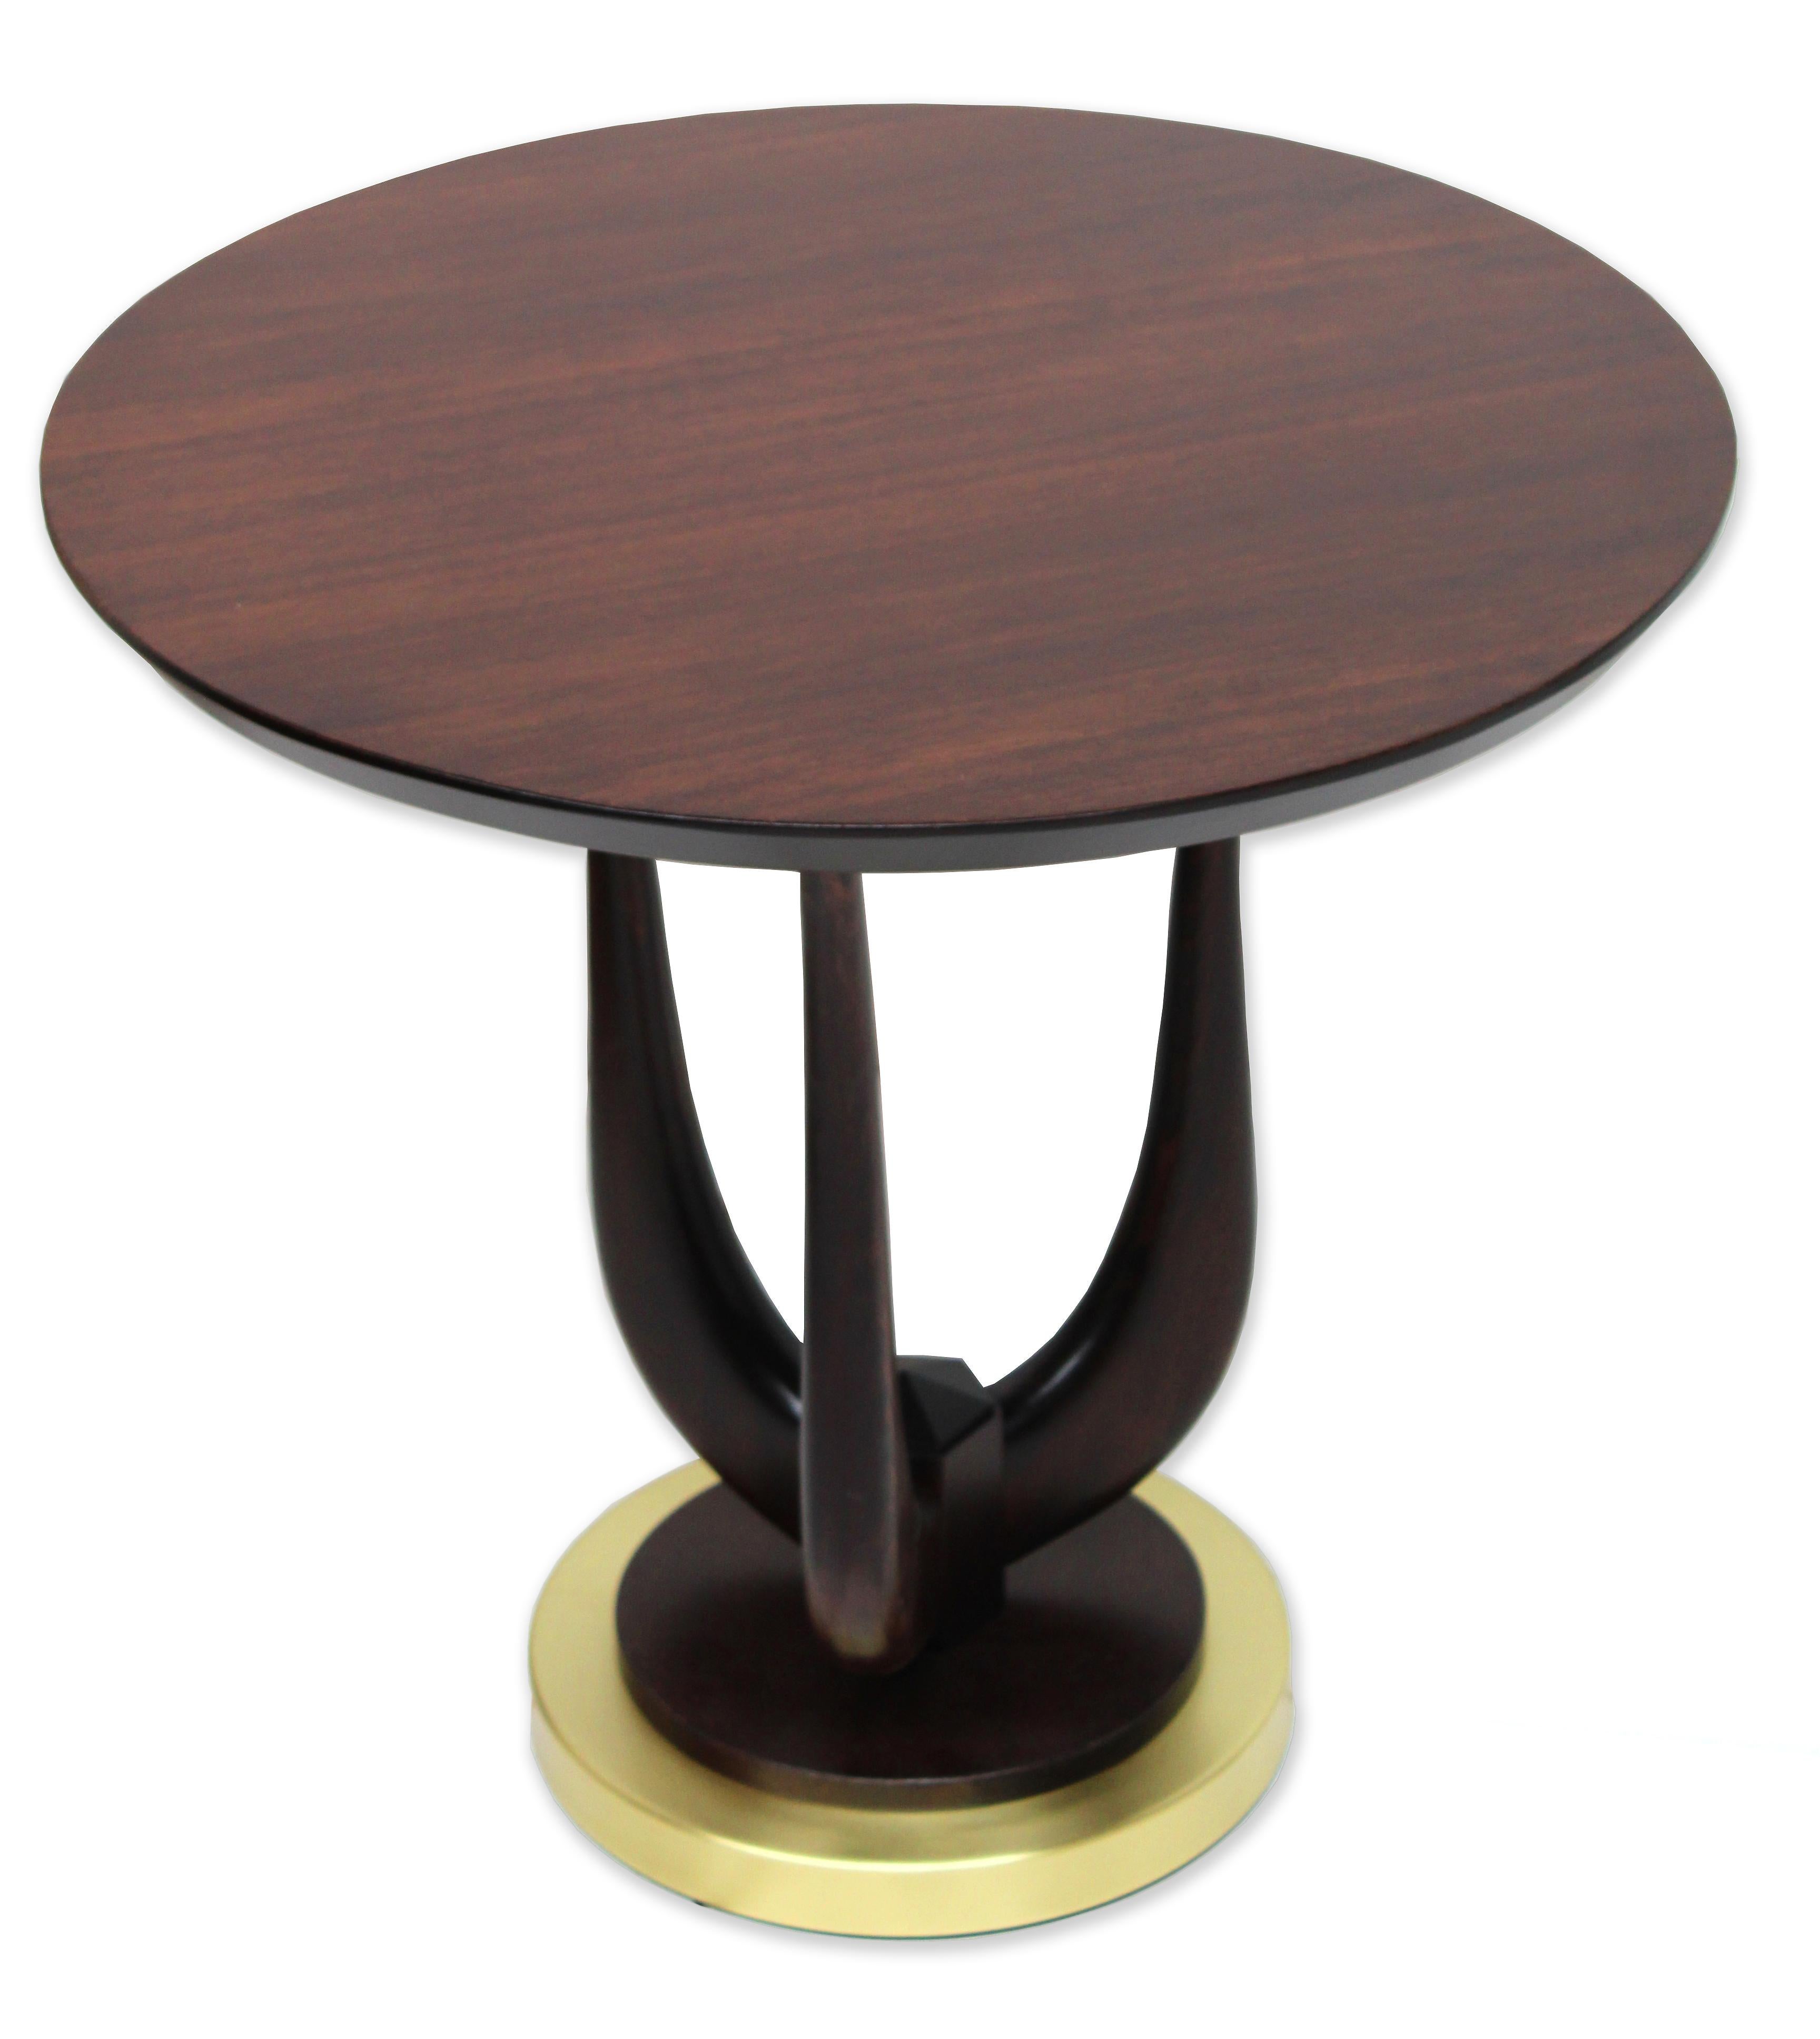 Crafted with meticulous care, this hand-made masterpiece features a satin brass base that forms the foundation for three sinuous legs in solid wood, branching out like a trident to elegantly cradle the wooden veneered top.

The juxtaposition of the